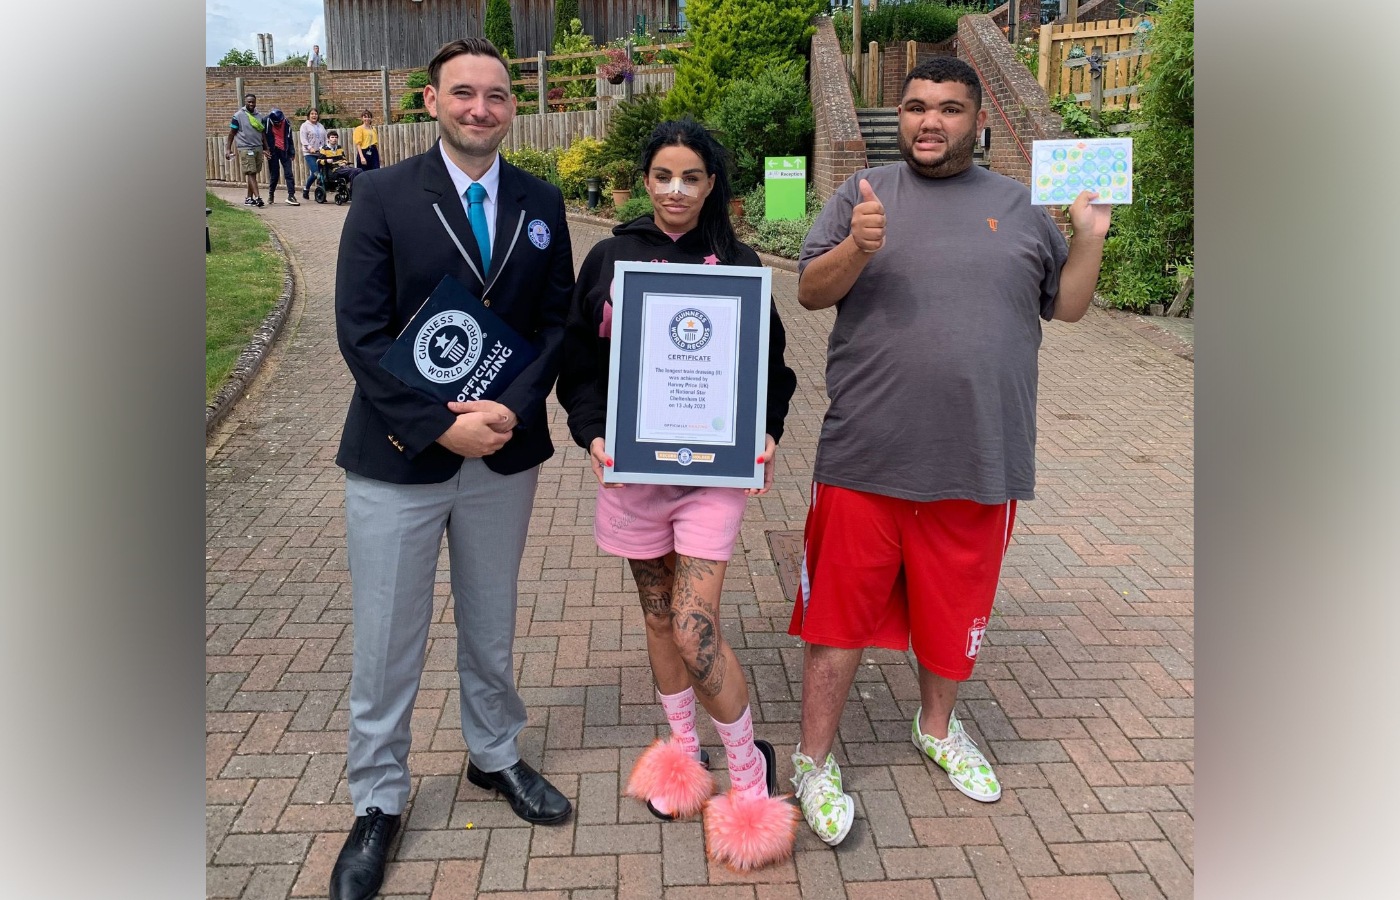 Harvey Price accepting his certificate for the Guinness World Record achievement.